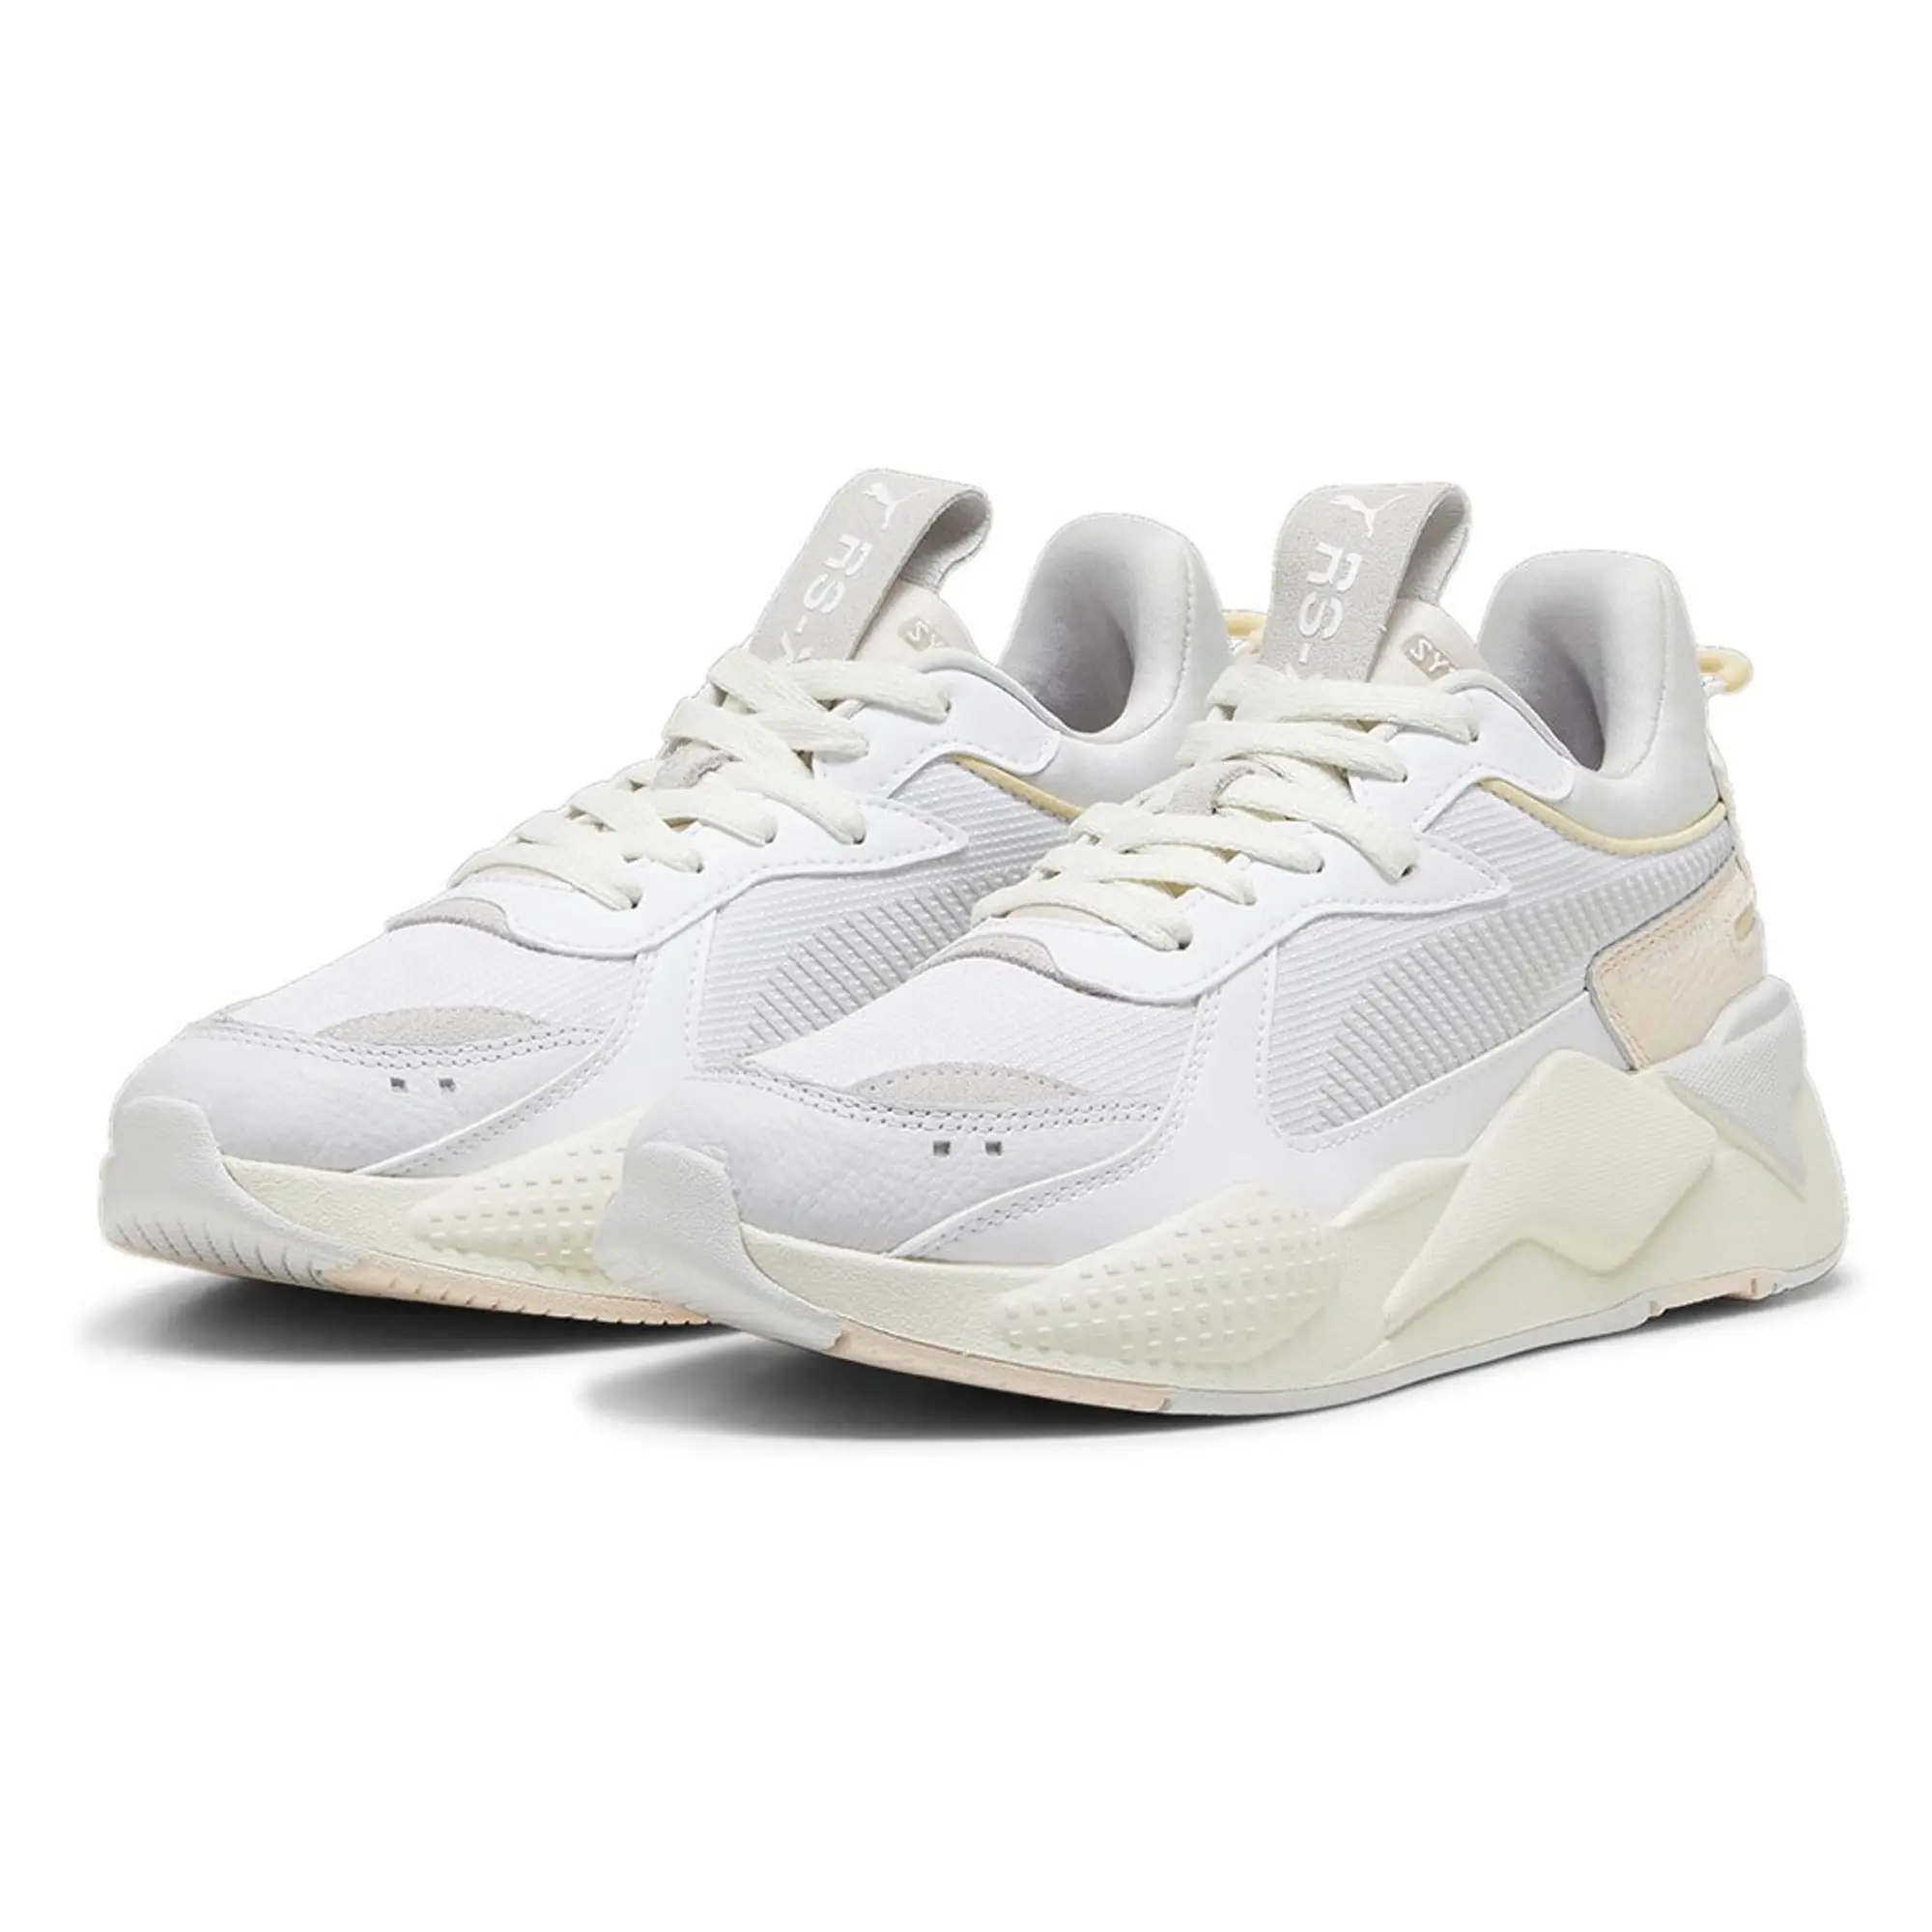 Puma Womens RS-X Soft Sneakers Trainers - Light Grey